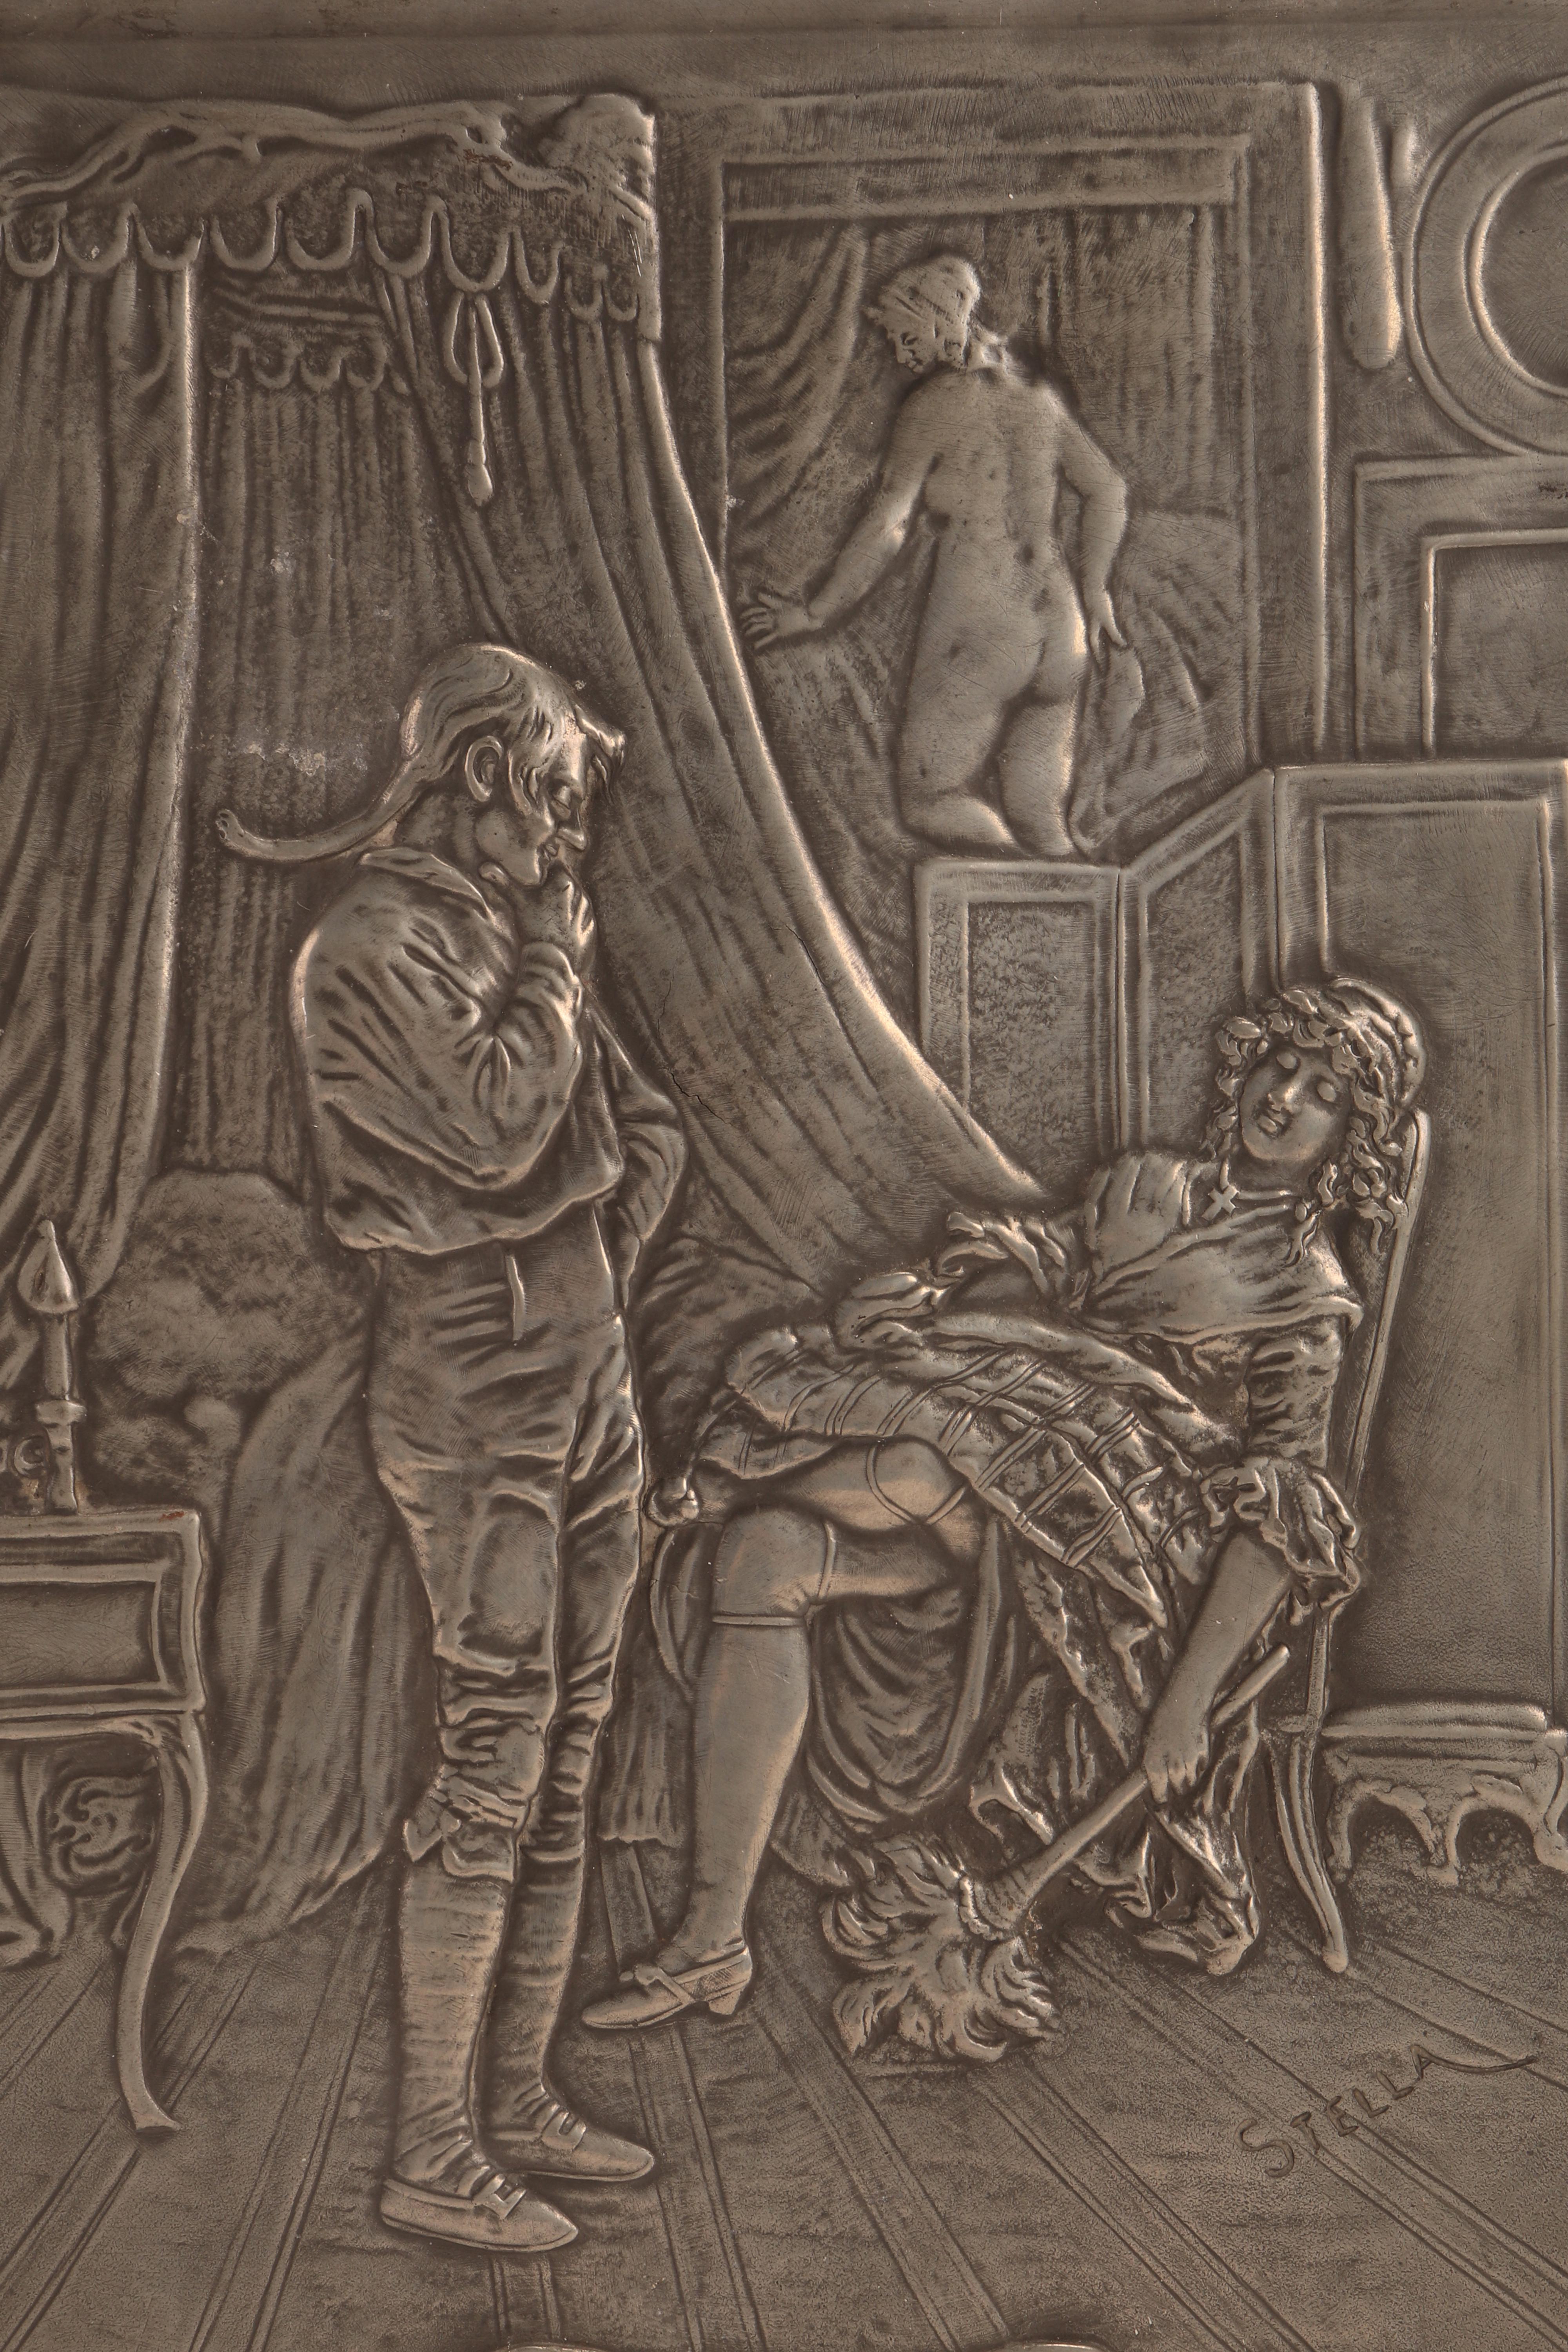 Erotic cast pewter plaque: A good surprise. In the bedroom with a bourgeois interior, the master of the house surprises the maid asleep, feather duster in hand and petticoat up. By Etienne Alexandre Stella (1850-1892). 

